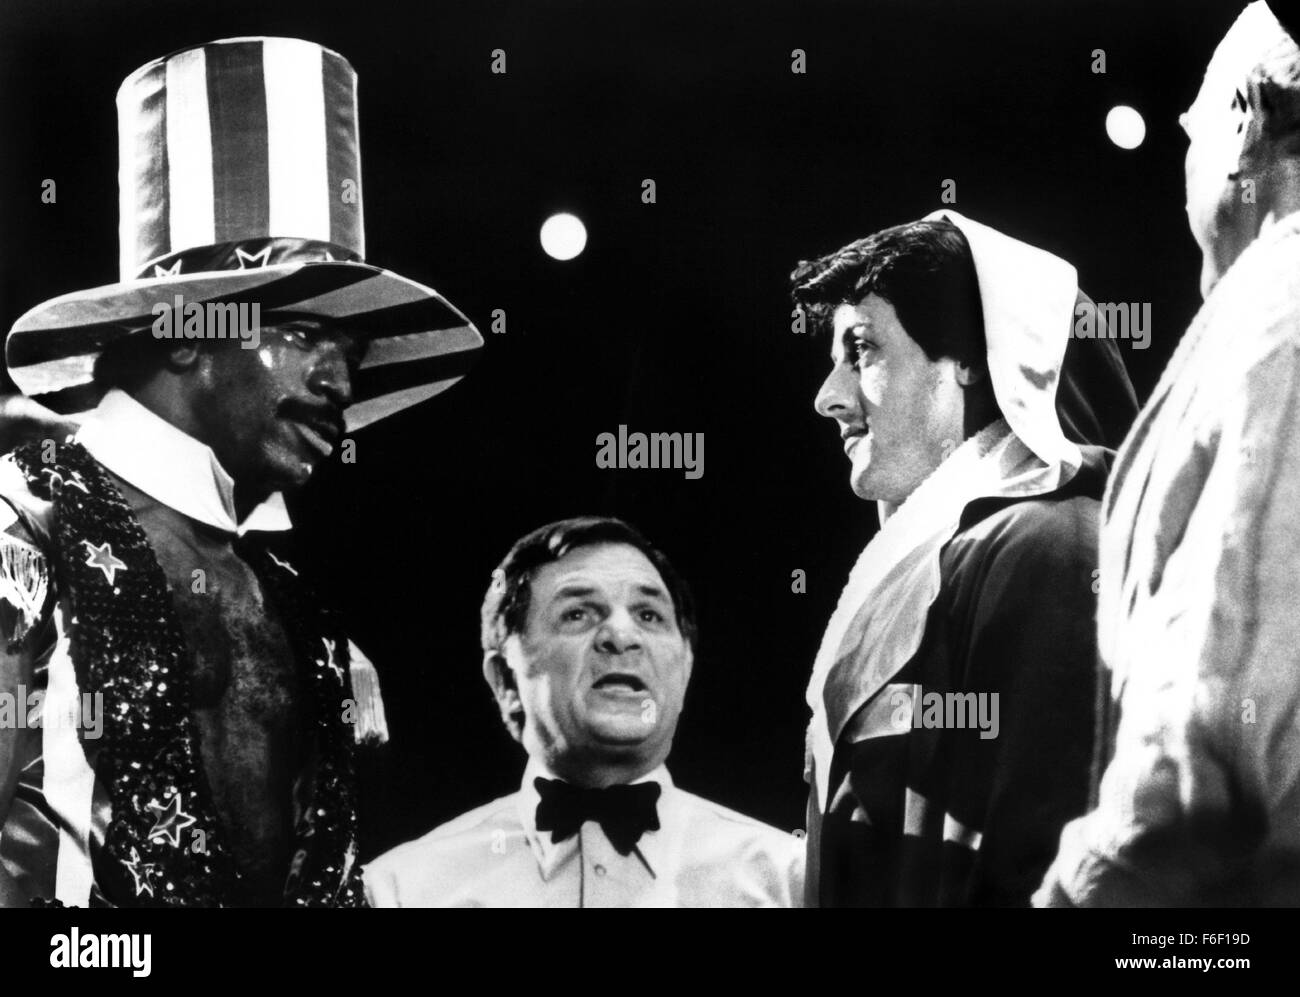 Film Title:  ROCKY.  DIRECTOR John G. Avildsen.  STUDIO:  United Artists.  PLOT:  The action-packed, crowd-pleasing story, shot mostly on location, tells of the rise of a small-time, underdog Philadelphia boxer, Rocky Balboa (Sylvester Stallone) against insurmountable odds in a big-time bout with Apollo Creed (Carl Weathers), with the emotional support of a shy,  loving girlfriend named Adrian (Talia Shire), and wily fight manager Mickey (Burgess Meredith). PICTURED:  CARL WEATHERS, SYLVESTER STALLONE. Stock Photo